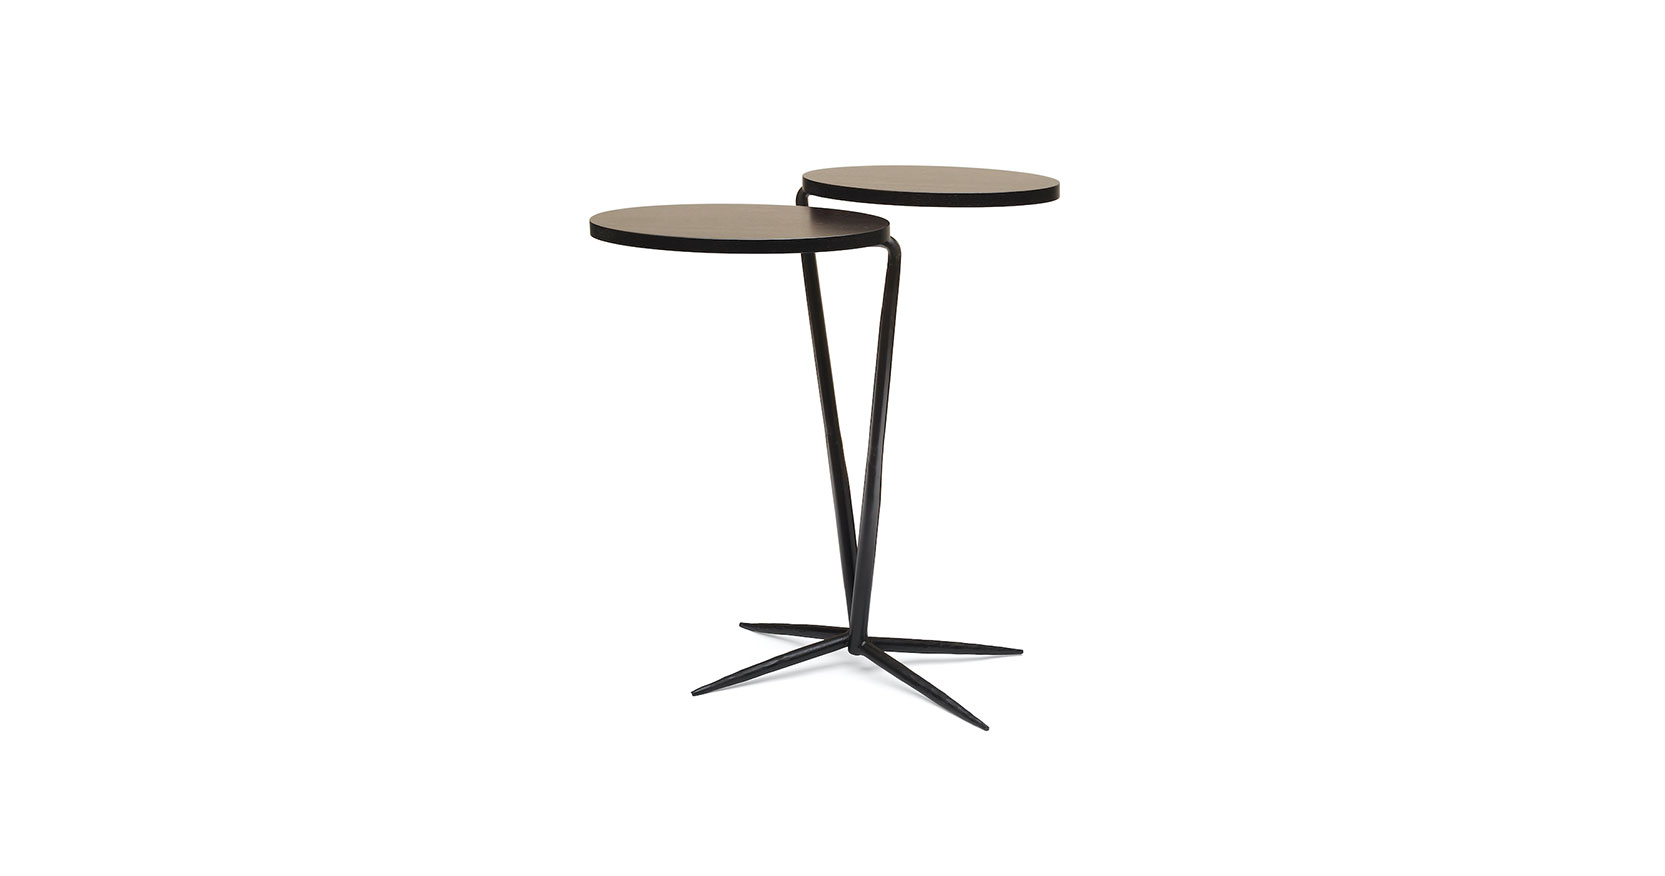 Eric Robin Twin stemmed pedestal table in sculpted iron with graphic feet supporting two oval wooden tops